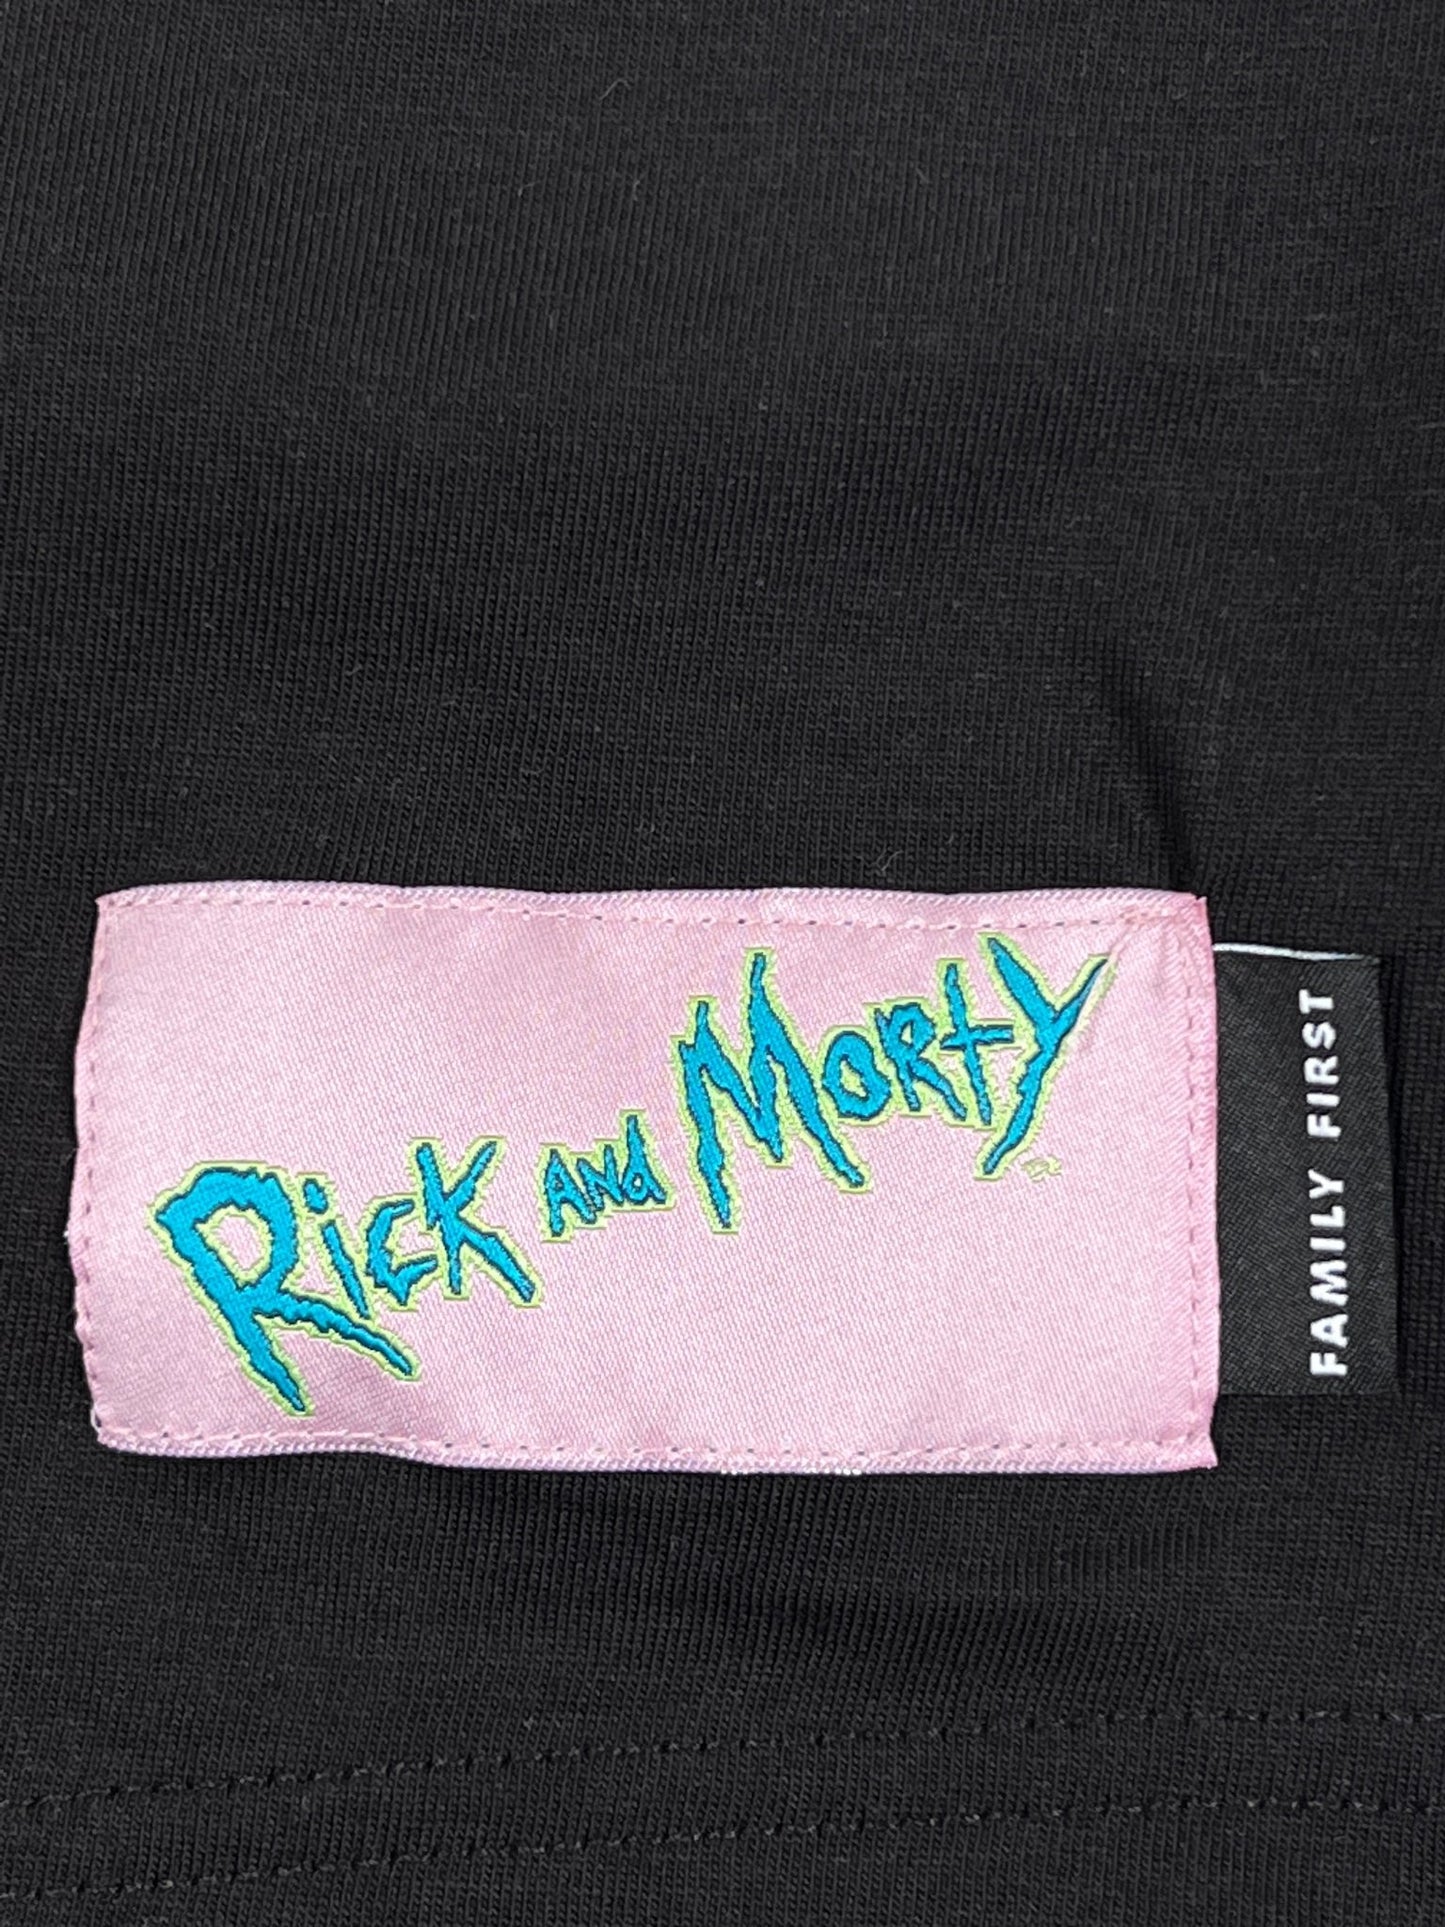 A black graphic FAMILY FIRST t-shirt with the words rick and morty on it, made from 100% cotton.